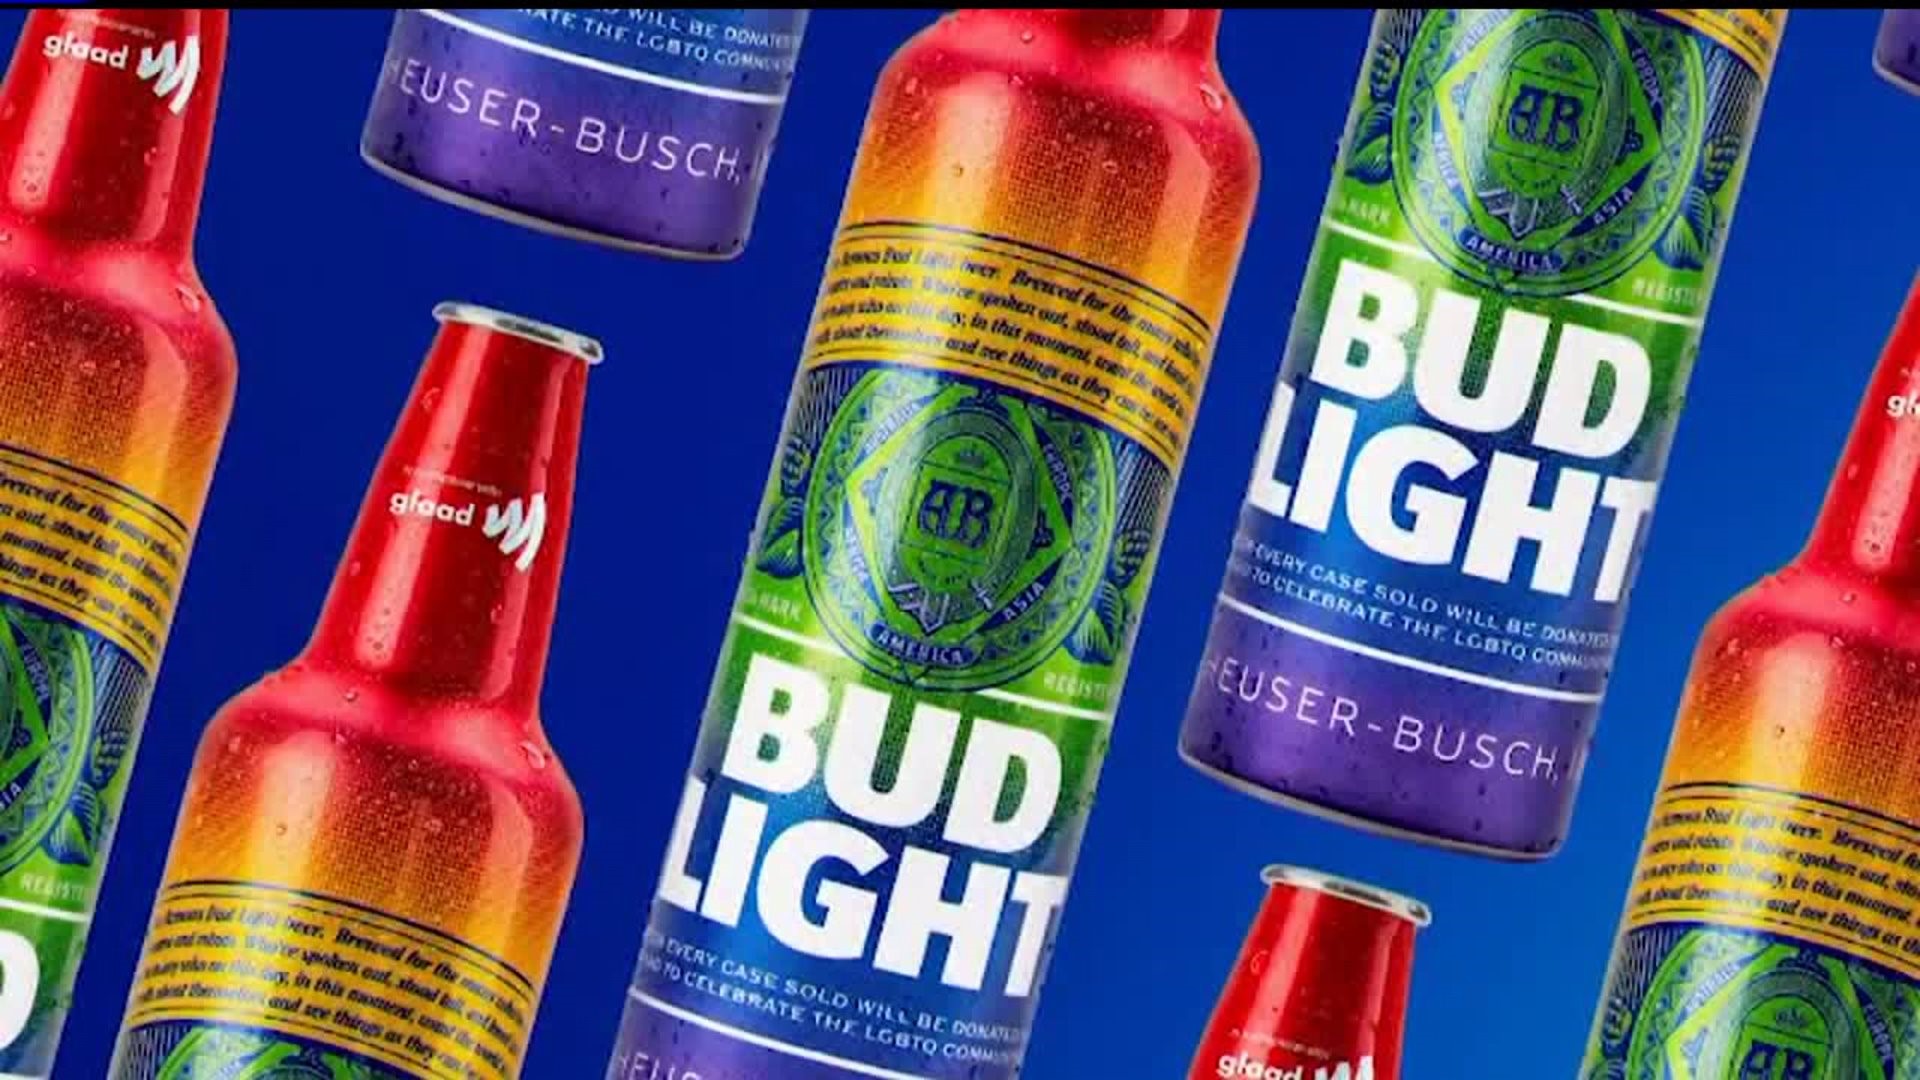 Bud Light launches rainbow pride bottles in support of LGBTQ Pride